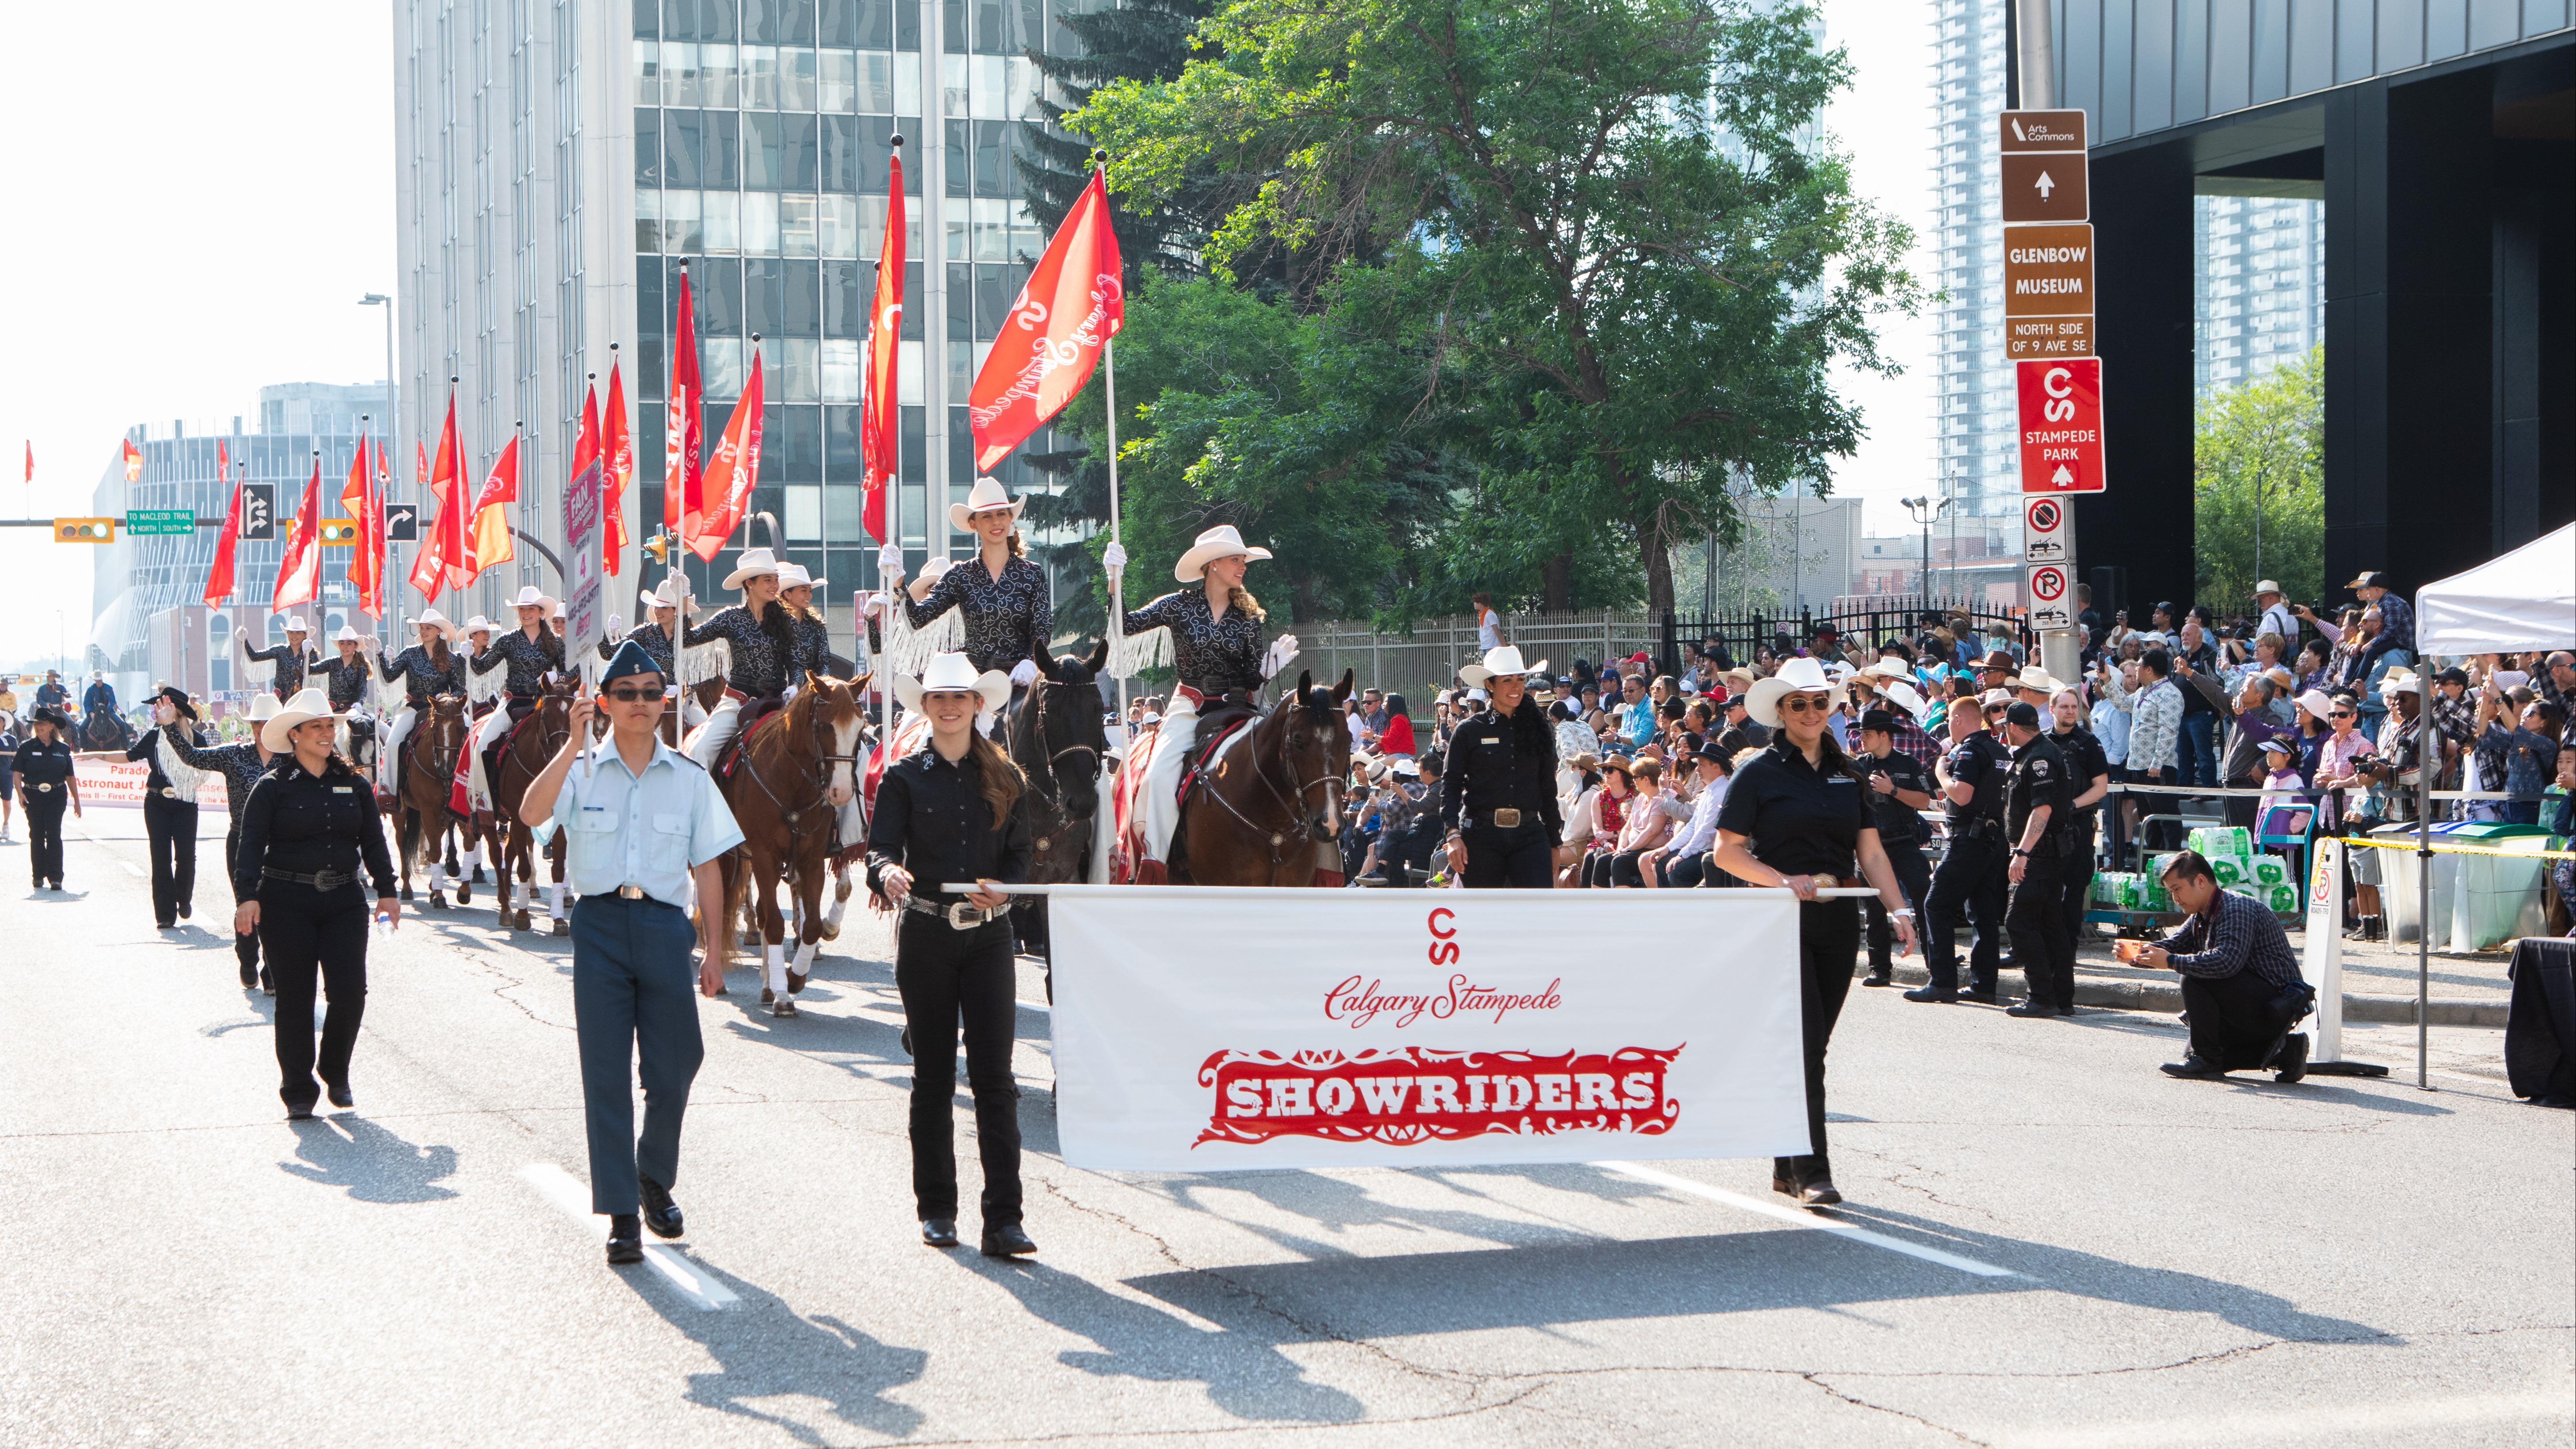 The Calgary Stampede Showriders take part in the Parade. 